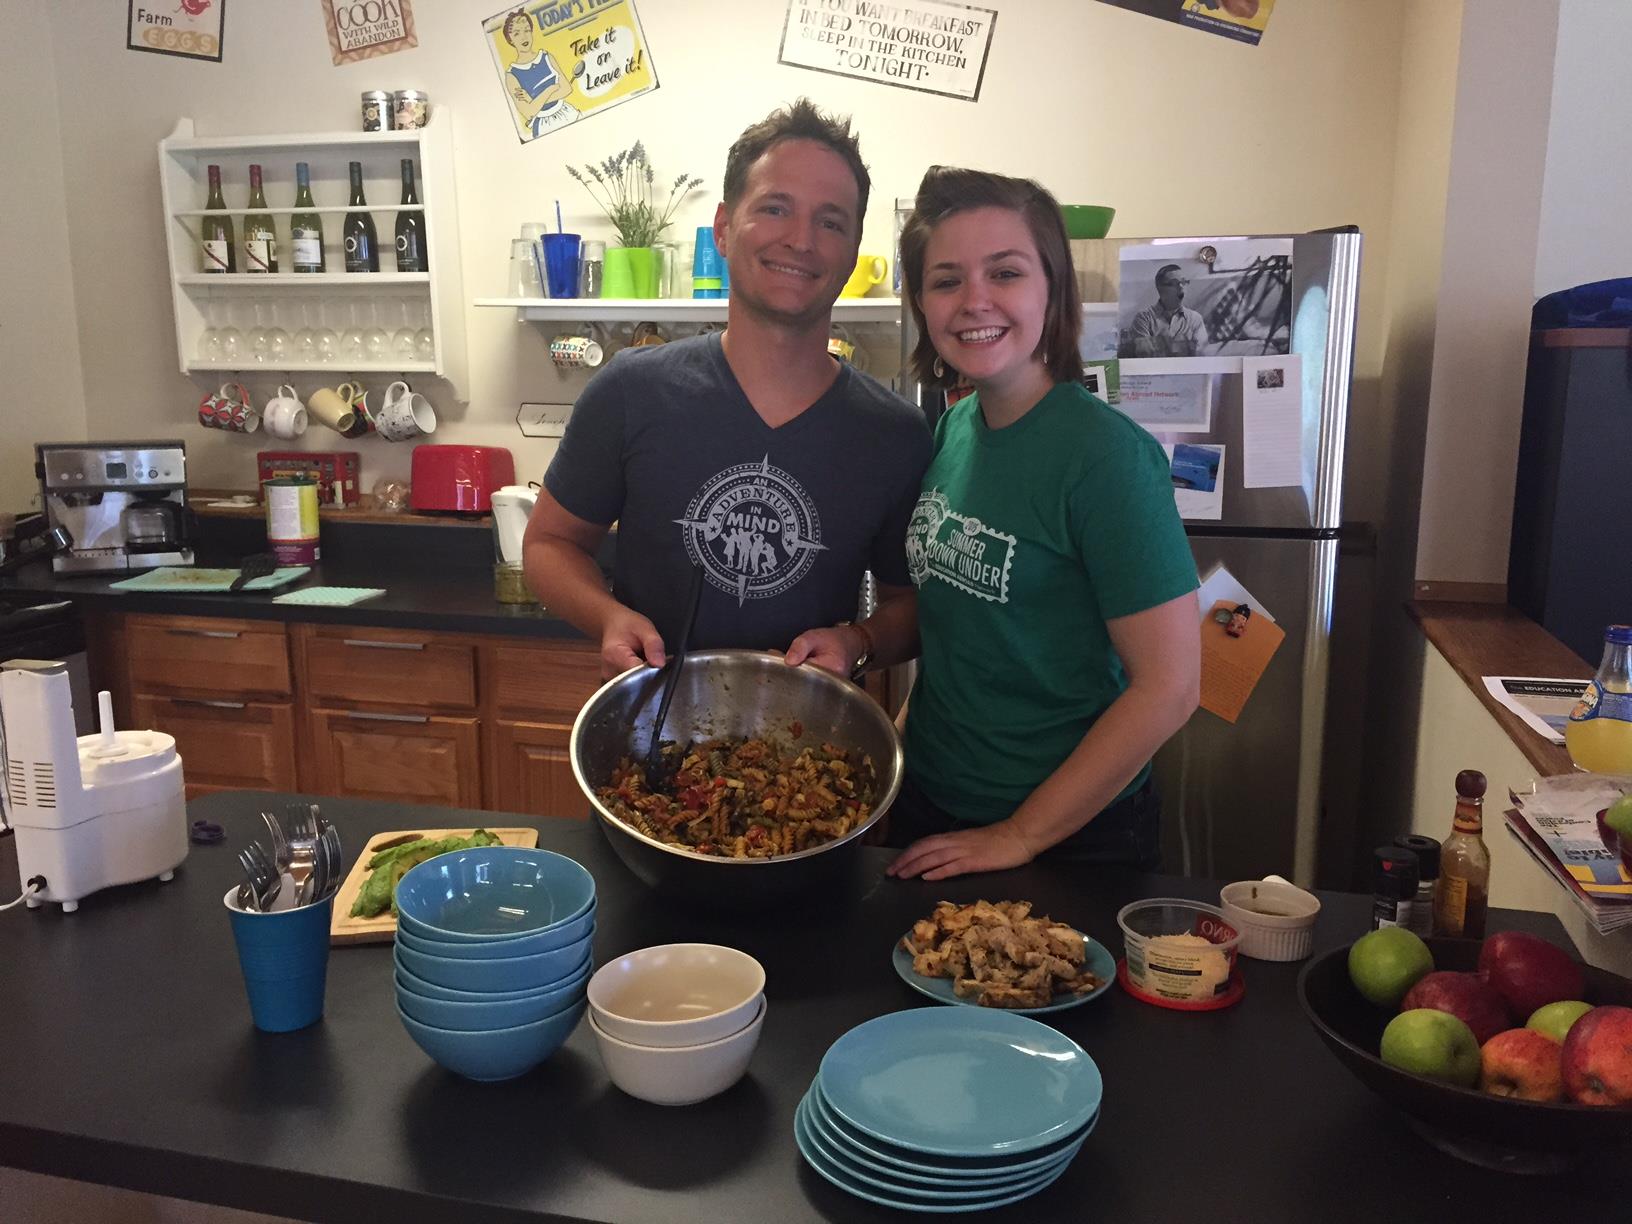 John and Lily making Friday lunch for the team. A weekly tradition in the Chicago office. 